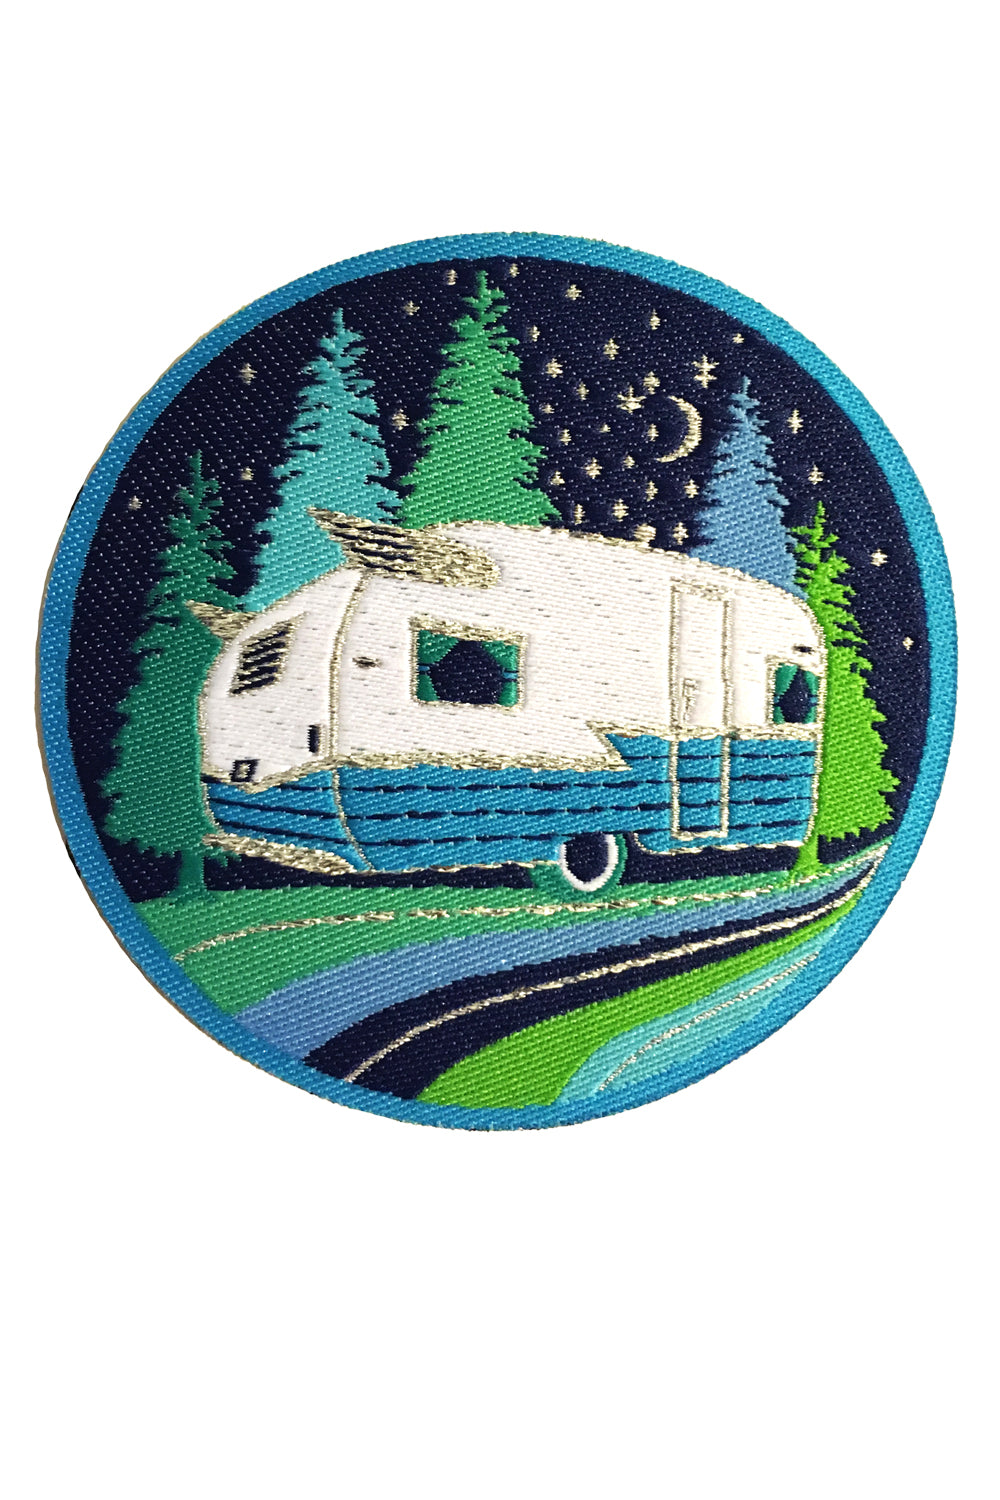 Blue and green iron on patch of vintage Shasta camper and trees 